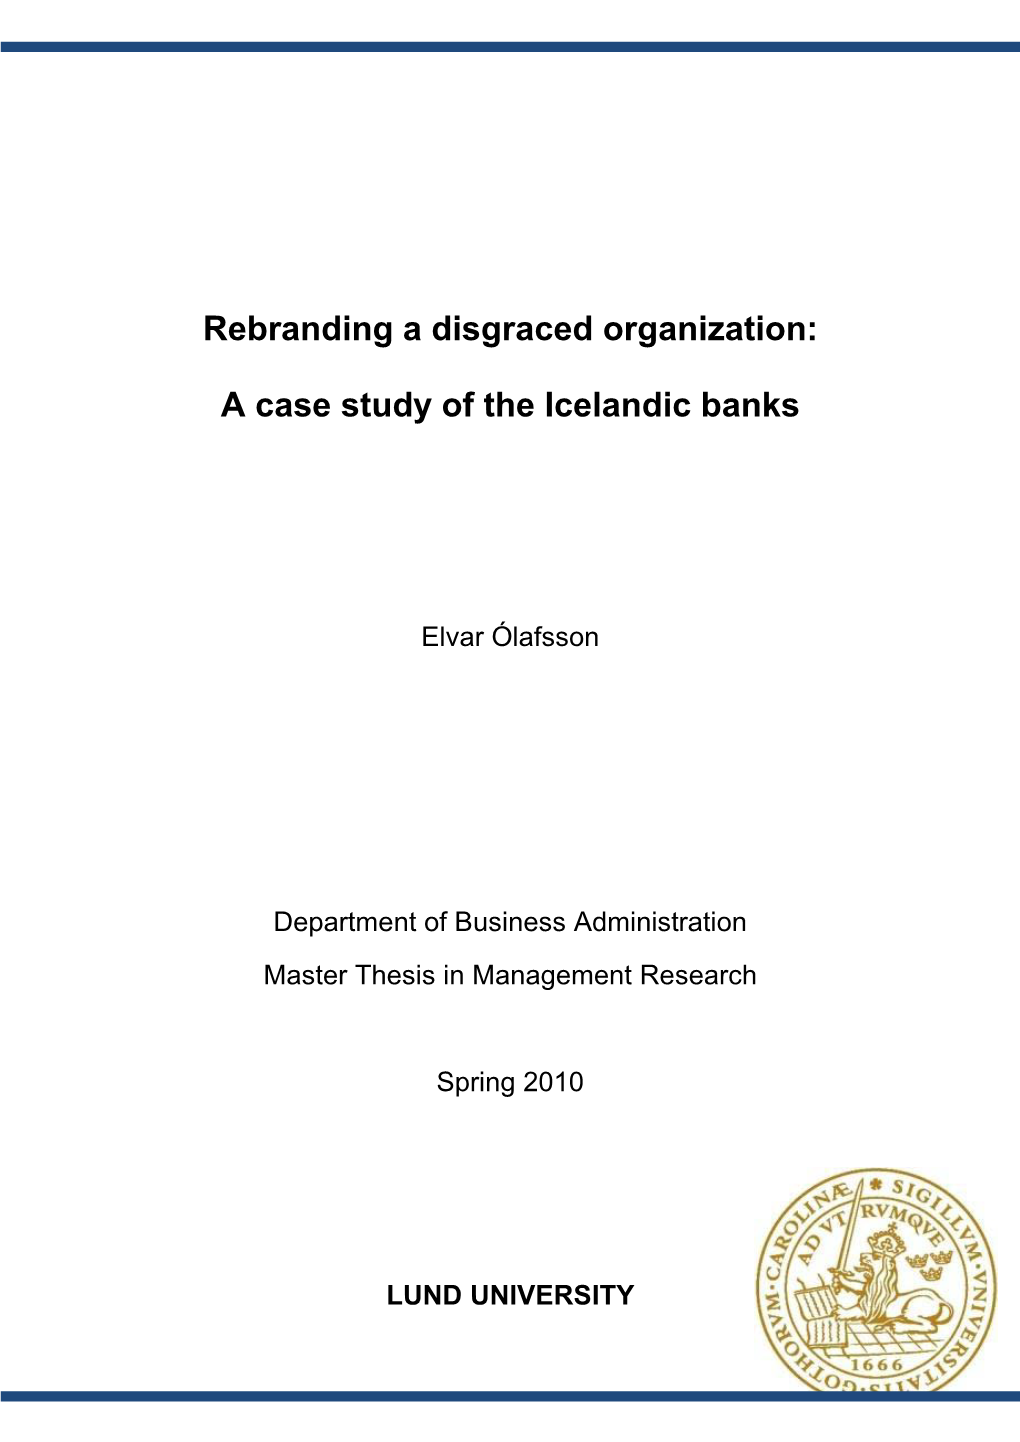 Rebranding a Disgraced Organization: a Case Study of the Icelandic Banks